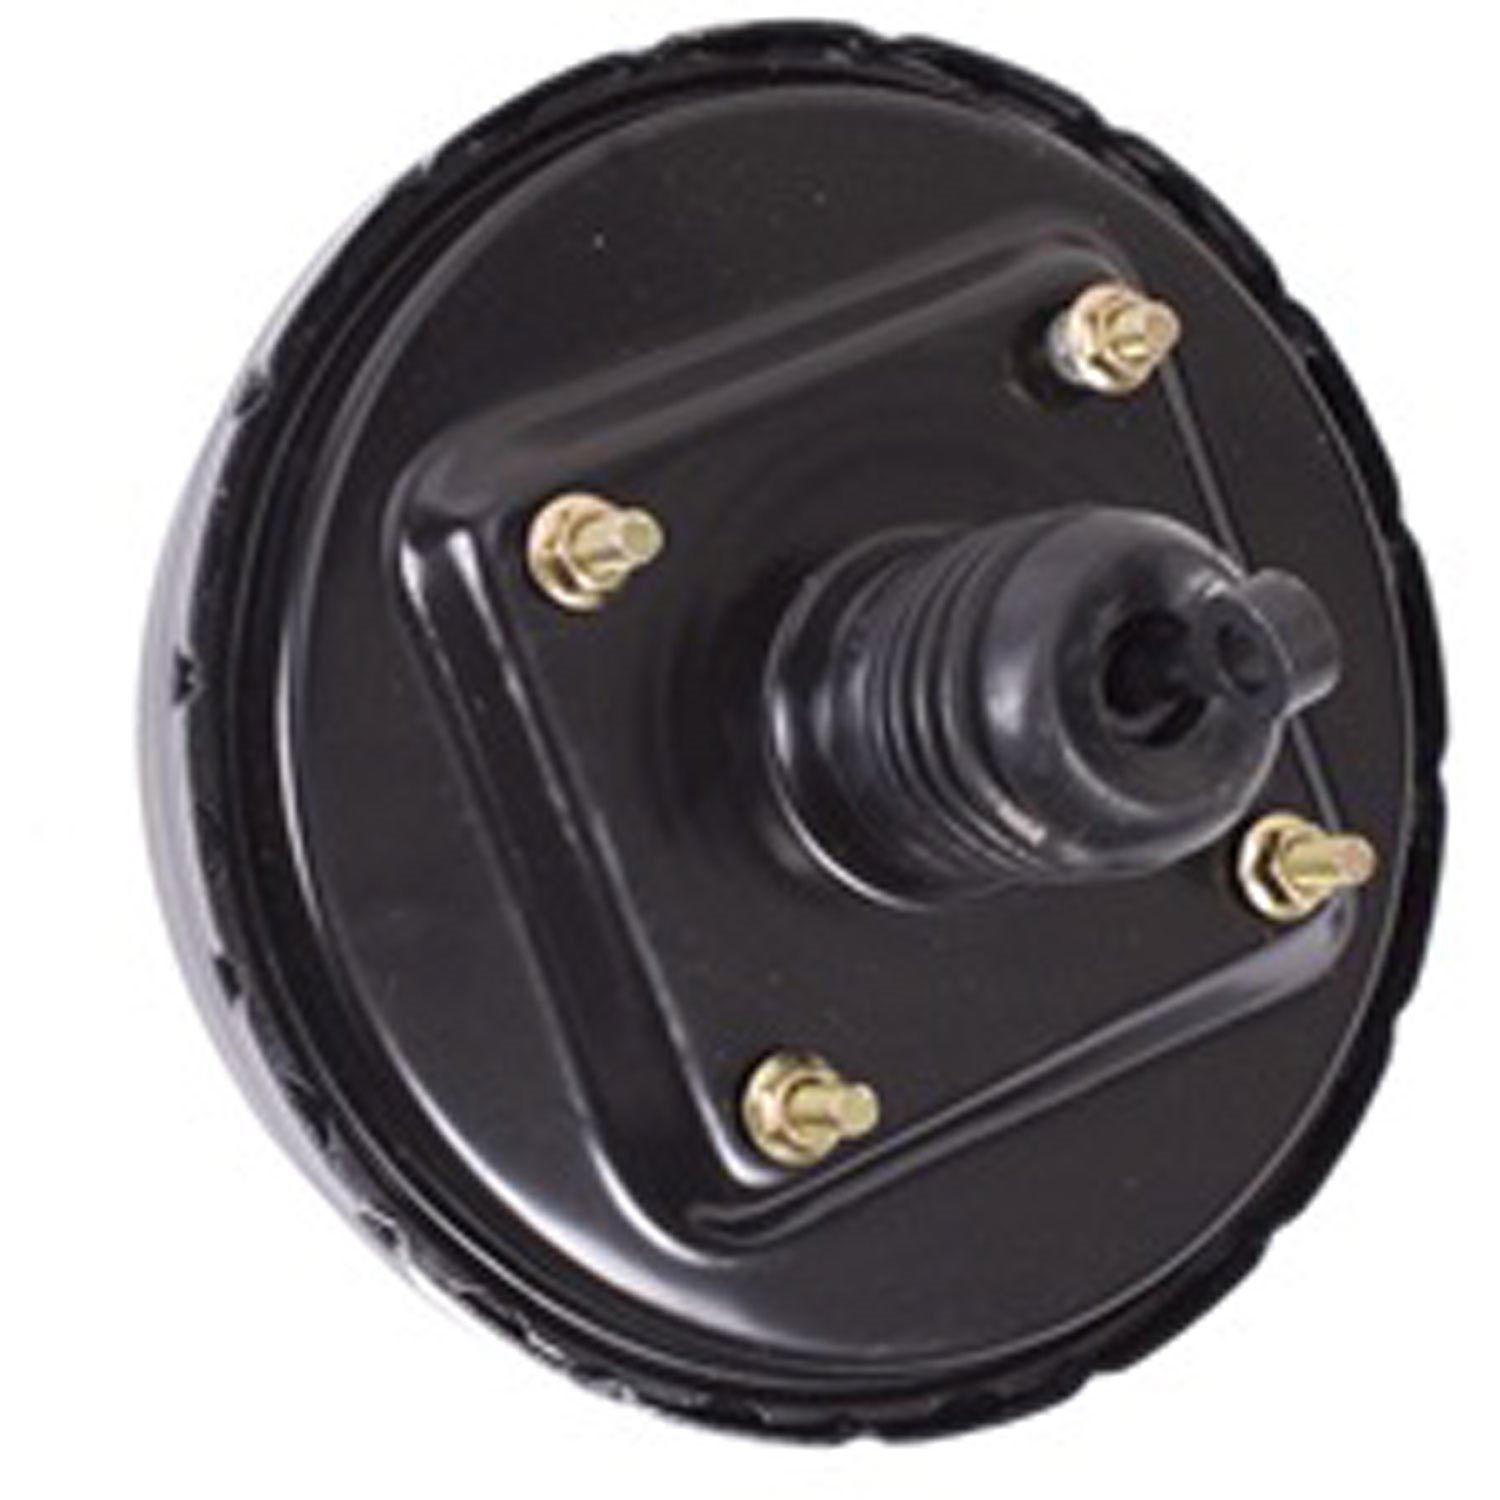 This power brake booster from Omix-ADA fits 82-86 Jeep CJ-5 CJ-7 and CJ-8s.